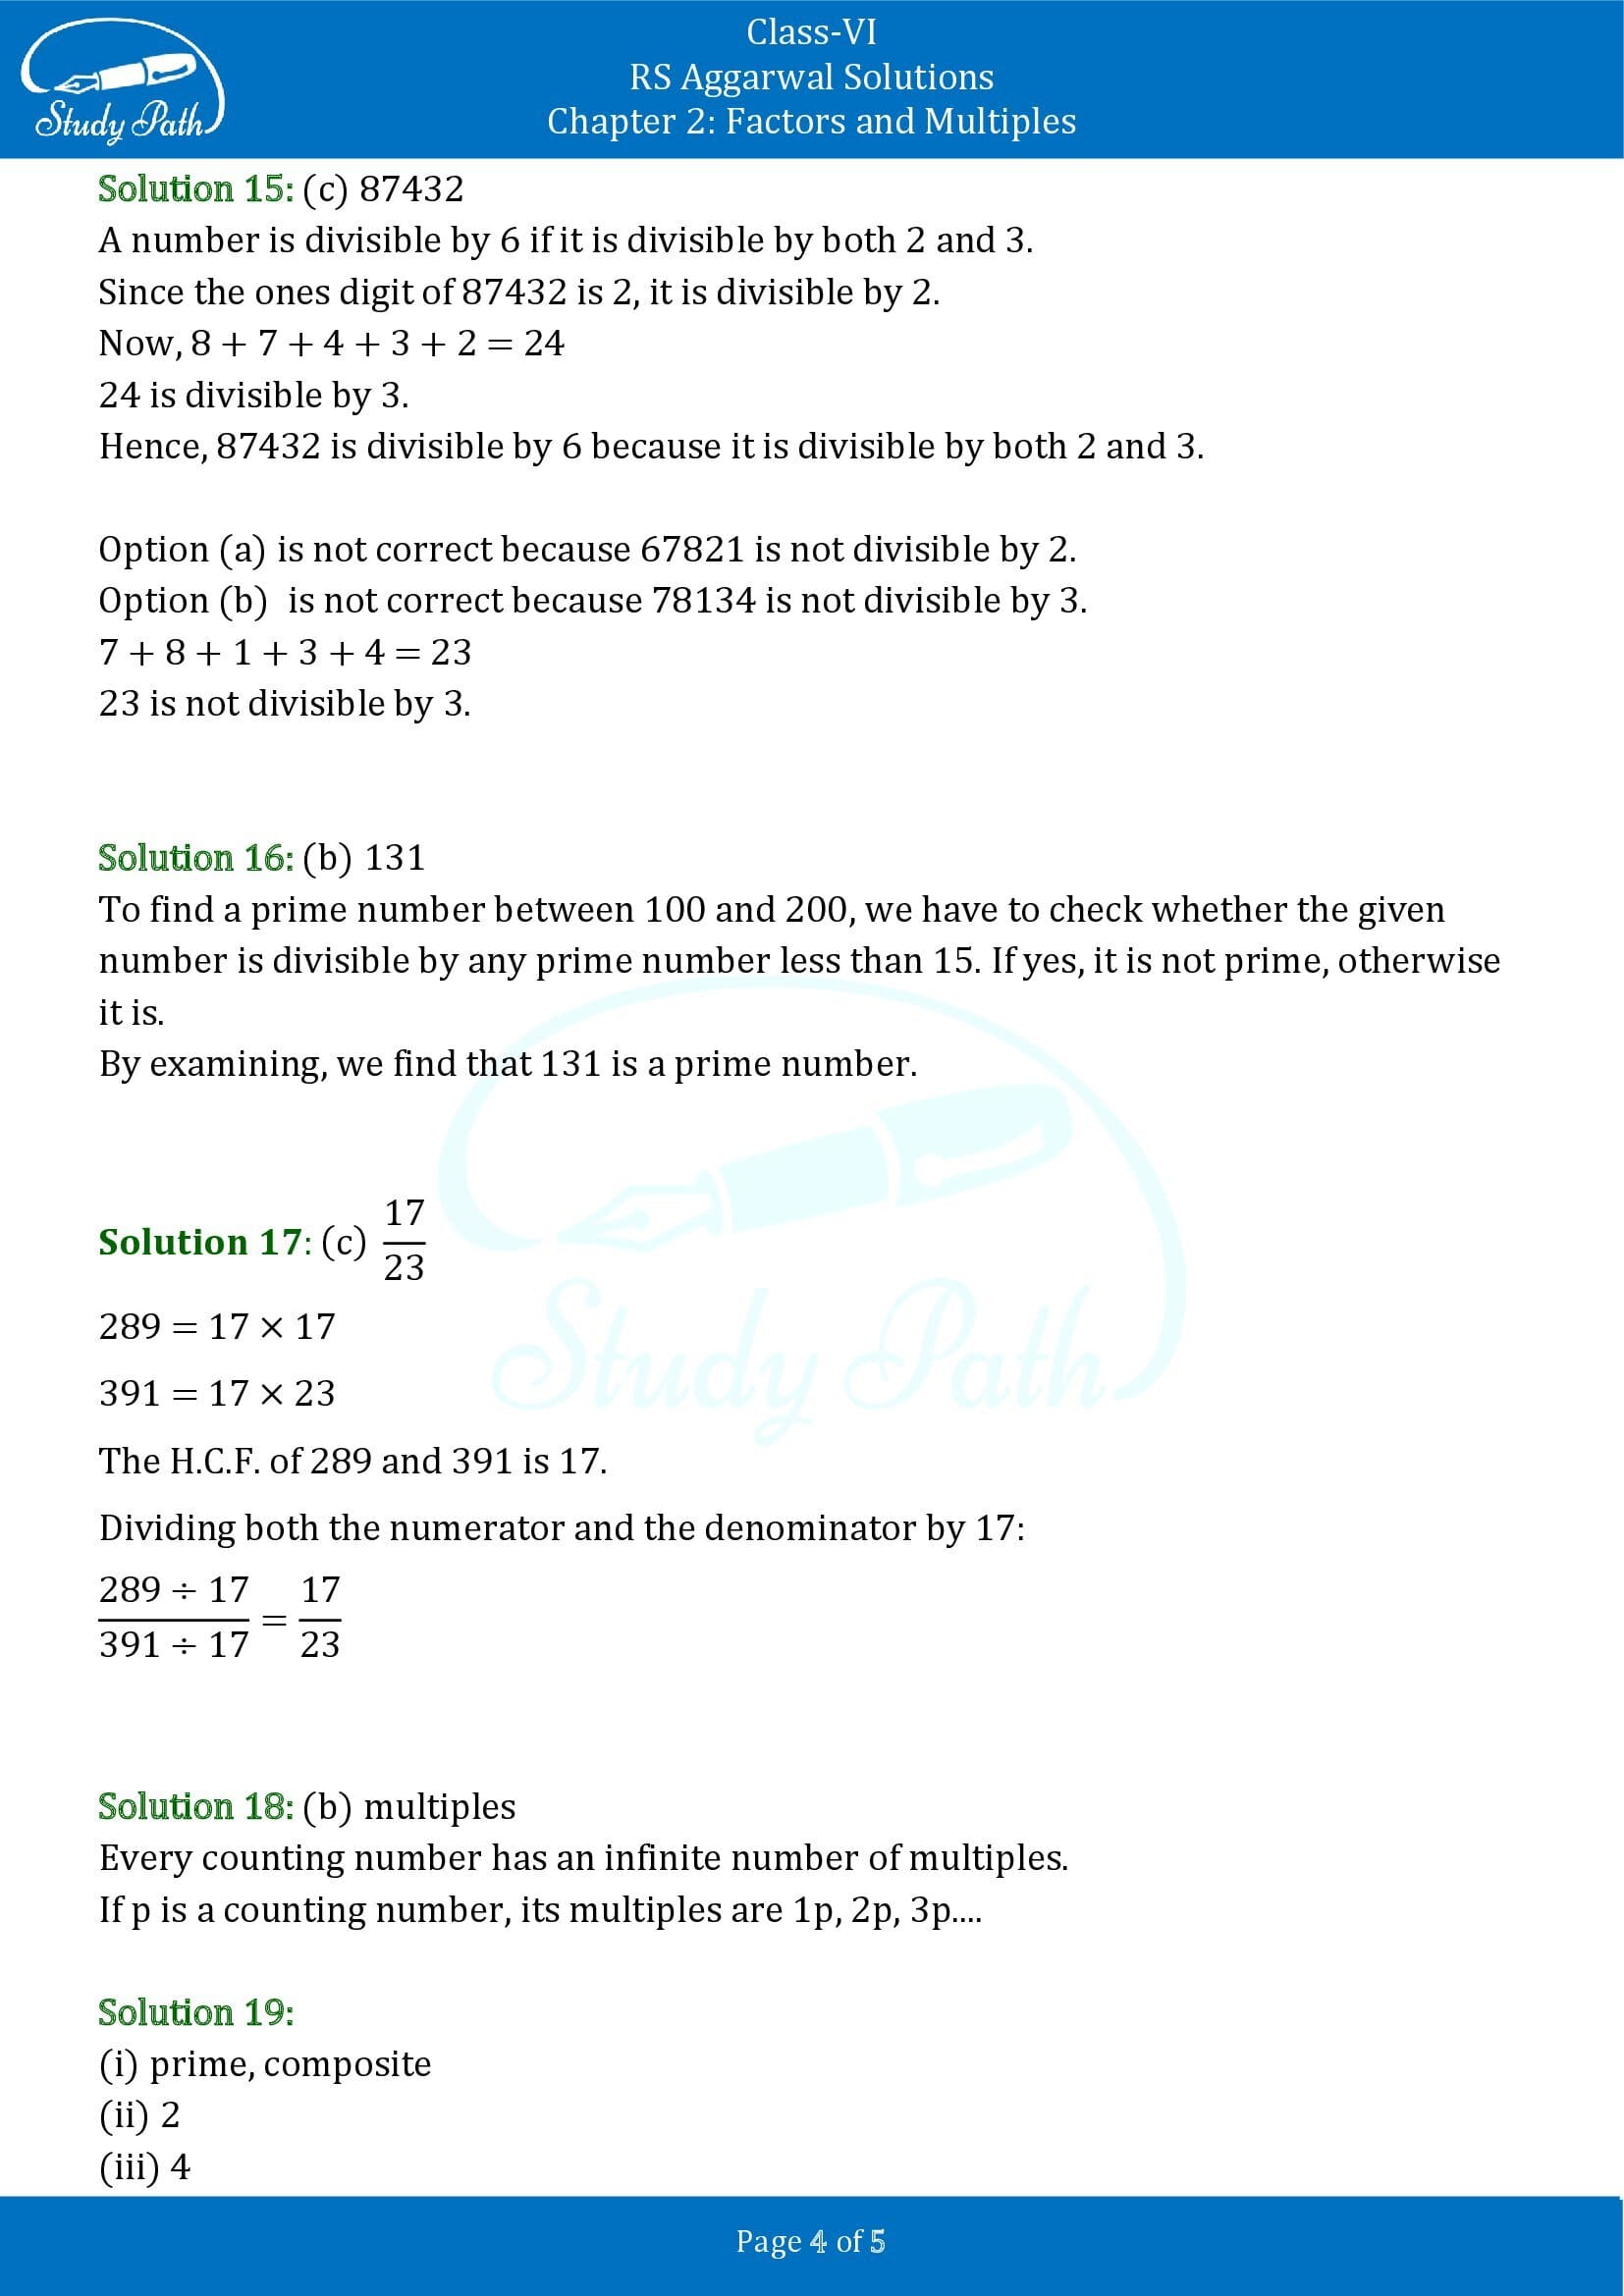 RS Aggarwal Solutions Class 6 Chapter 2 Factors and Multiples Test Paper 00004